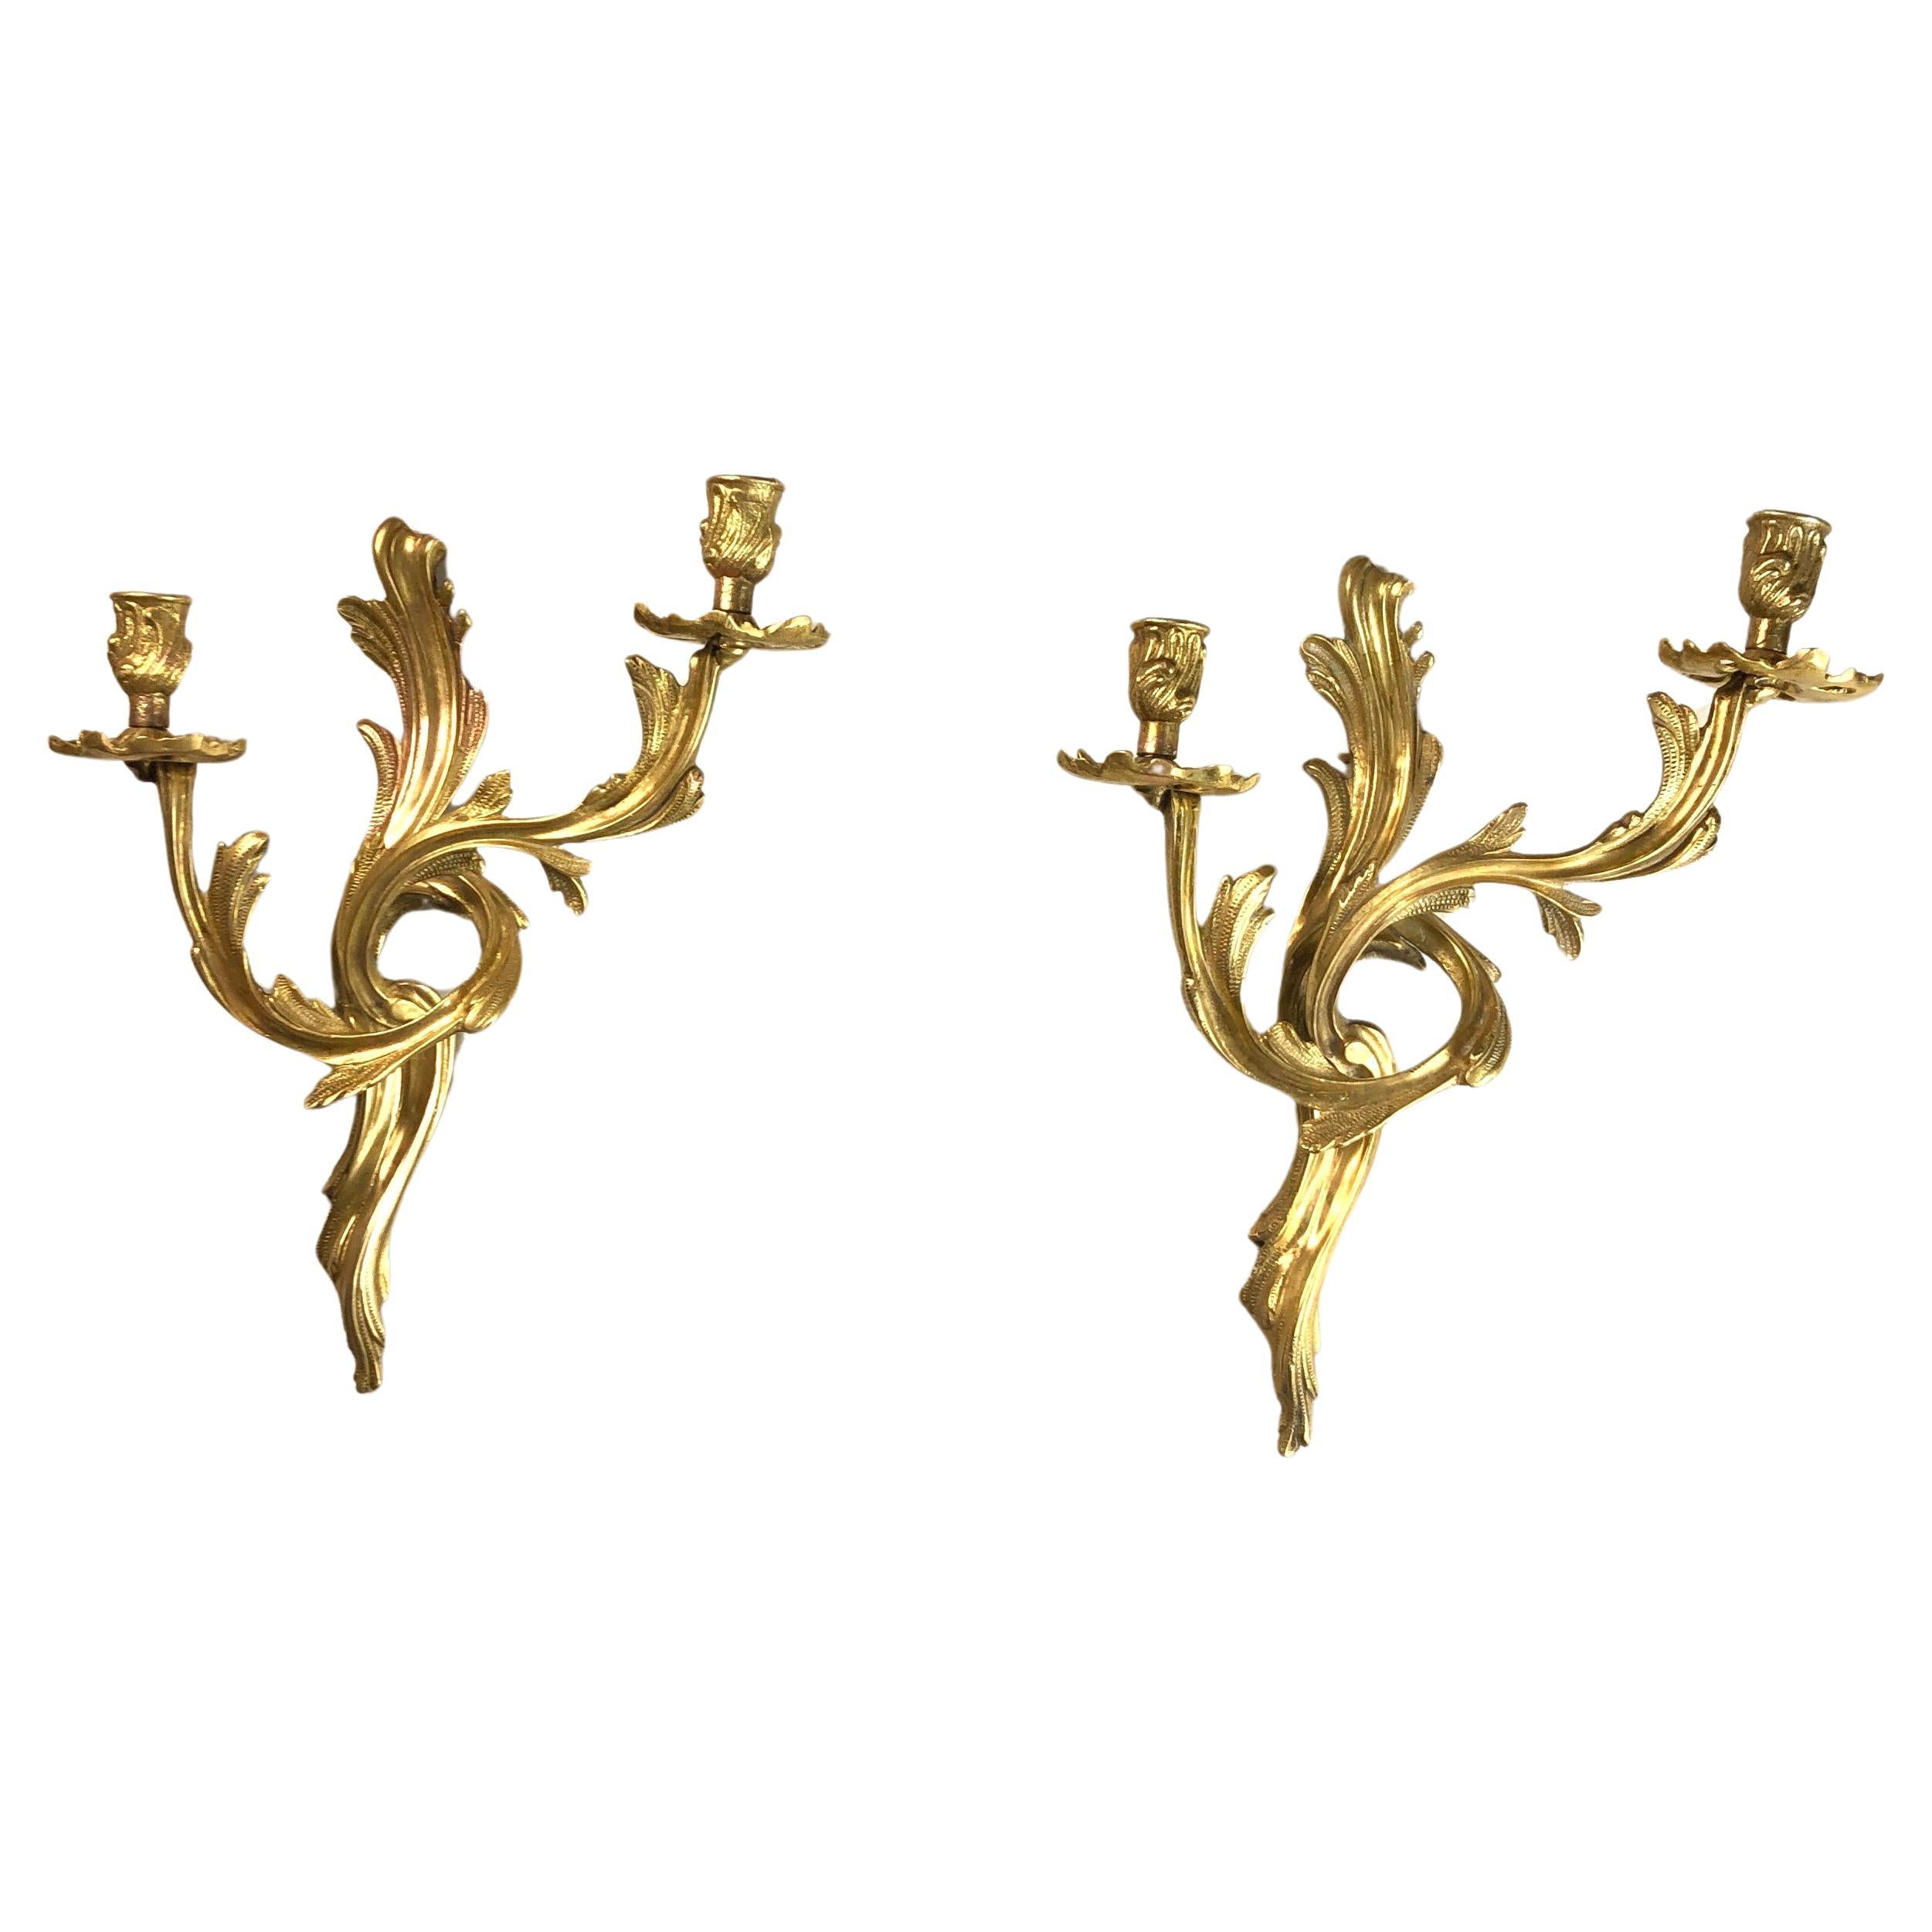 A French pair of cast brass double arm opposing antique wall sconces, the acanthus leaf scrolling arms with leaf bobeche drip pans and bulbous leaf candle sconces, issuing from a opposing acanthus leaf backplate, good original condition that has had